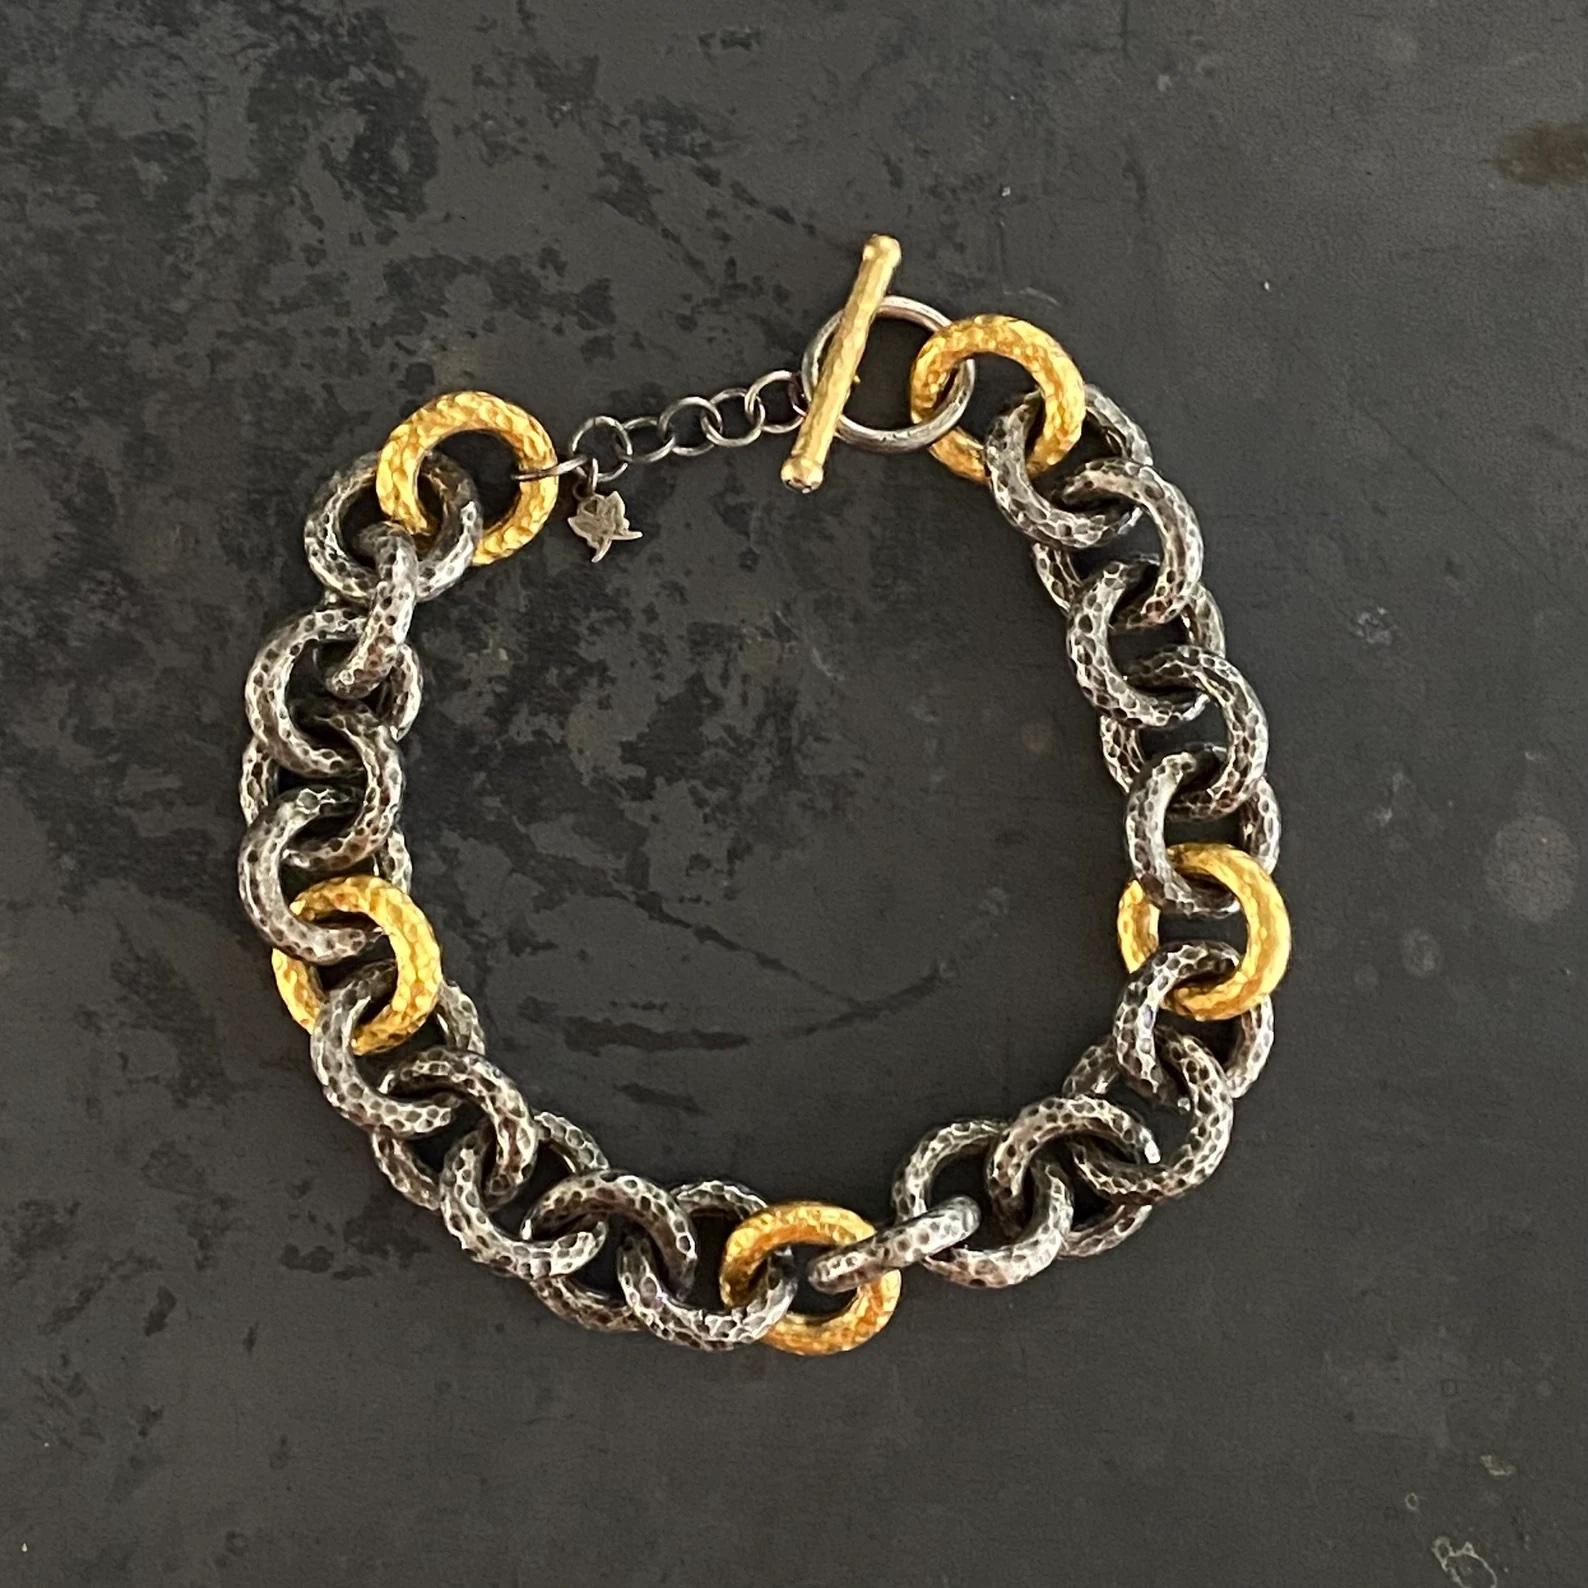 Byzantine Mens Heavy Hammered Silver 24K Yellow Gold-Fused Large Link Bracelet & Diamonds For Sale